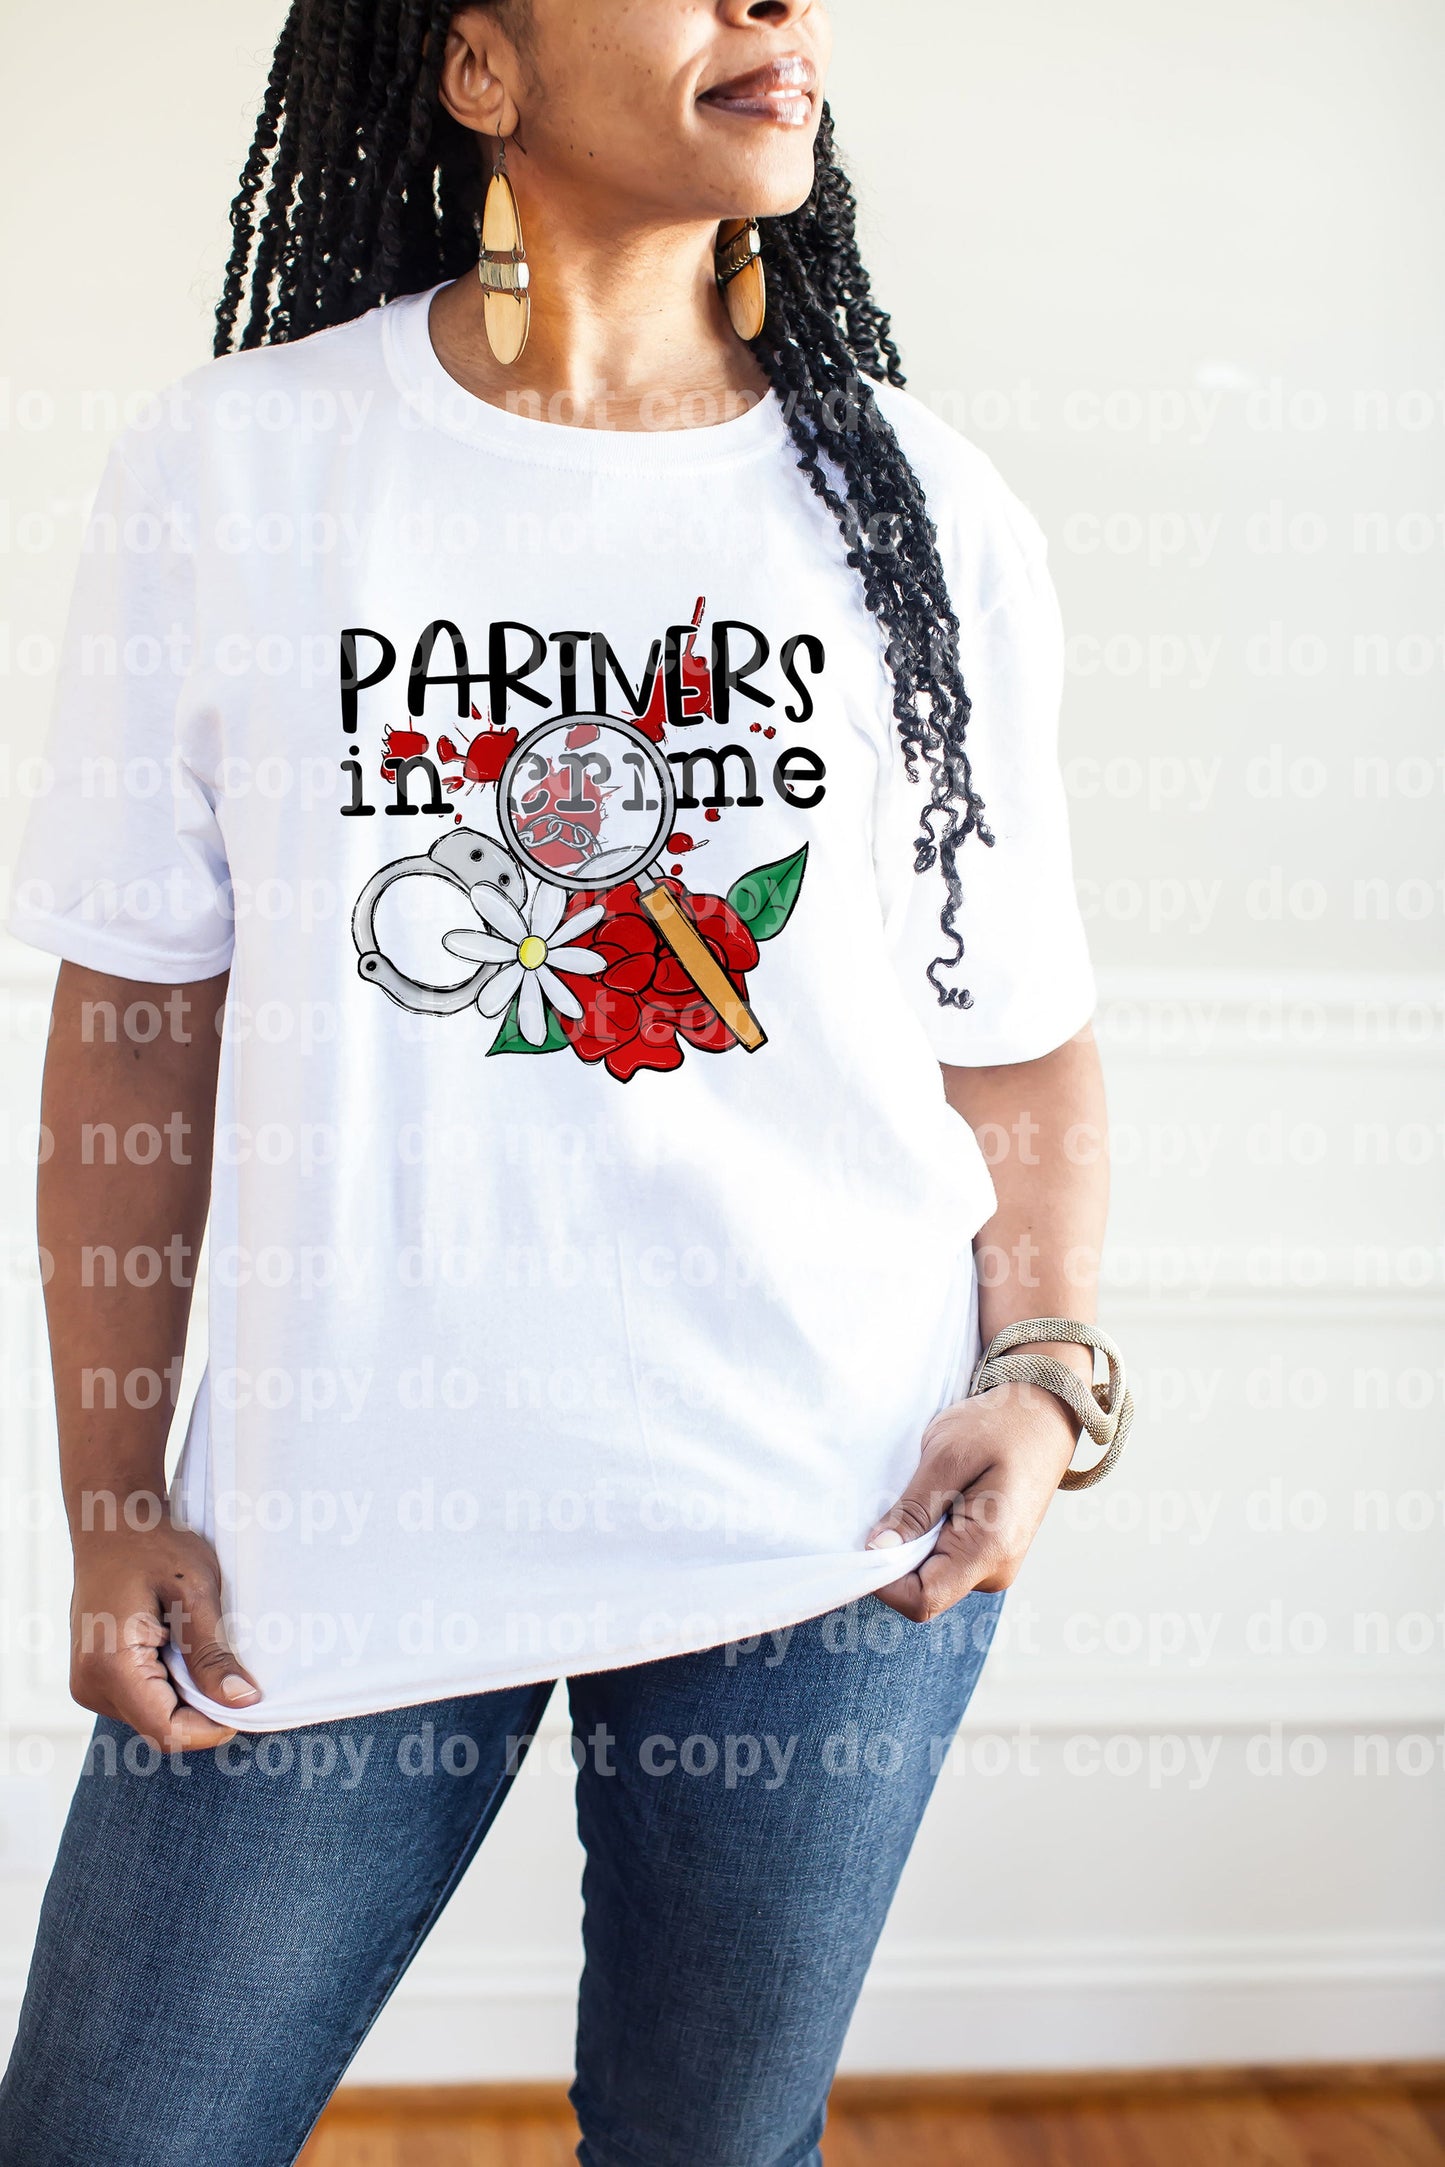 Partners In Crime Dream Print or Sublimation Print